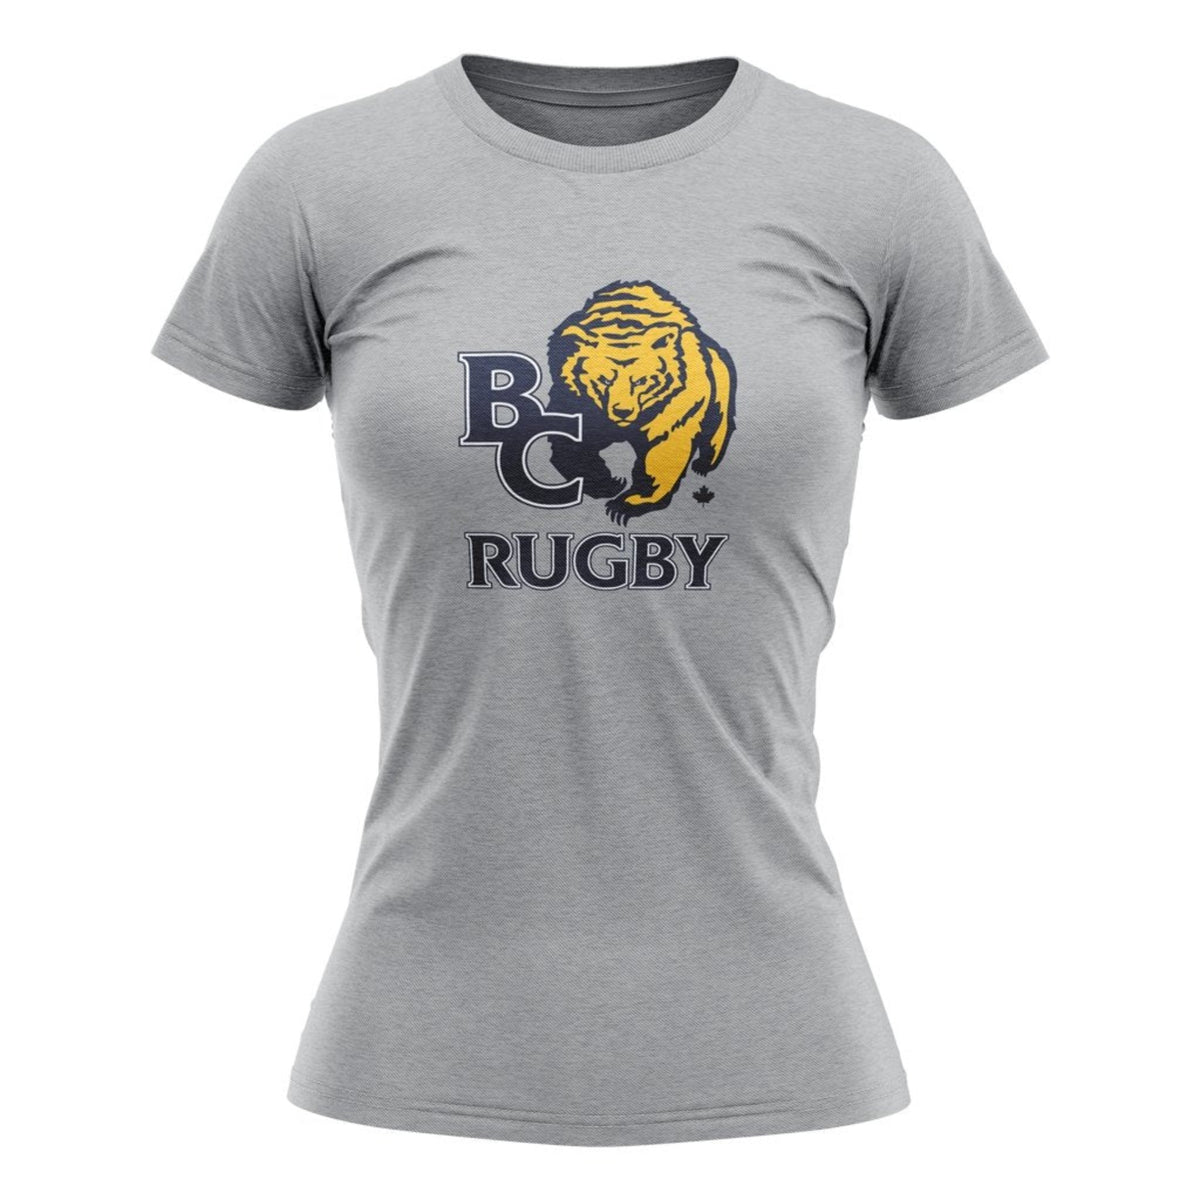 BC Rugby 2021 &quot;Team&quot; Tee - Women&#39;s Navy/Grey/White/Gold - www.therugbyshop.com www.therugbyshop.com WOMENS / GREY / XS XIX Brands TEES BC Rugby 2021 &quot;Team&quot; Tee - Women&#39;s Navy/Grey/White/Gold